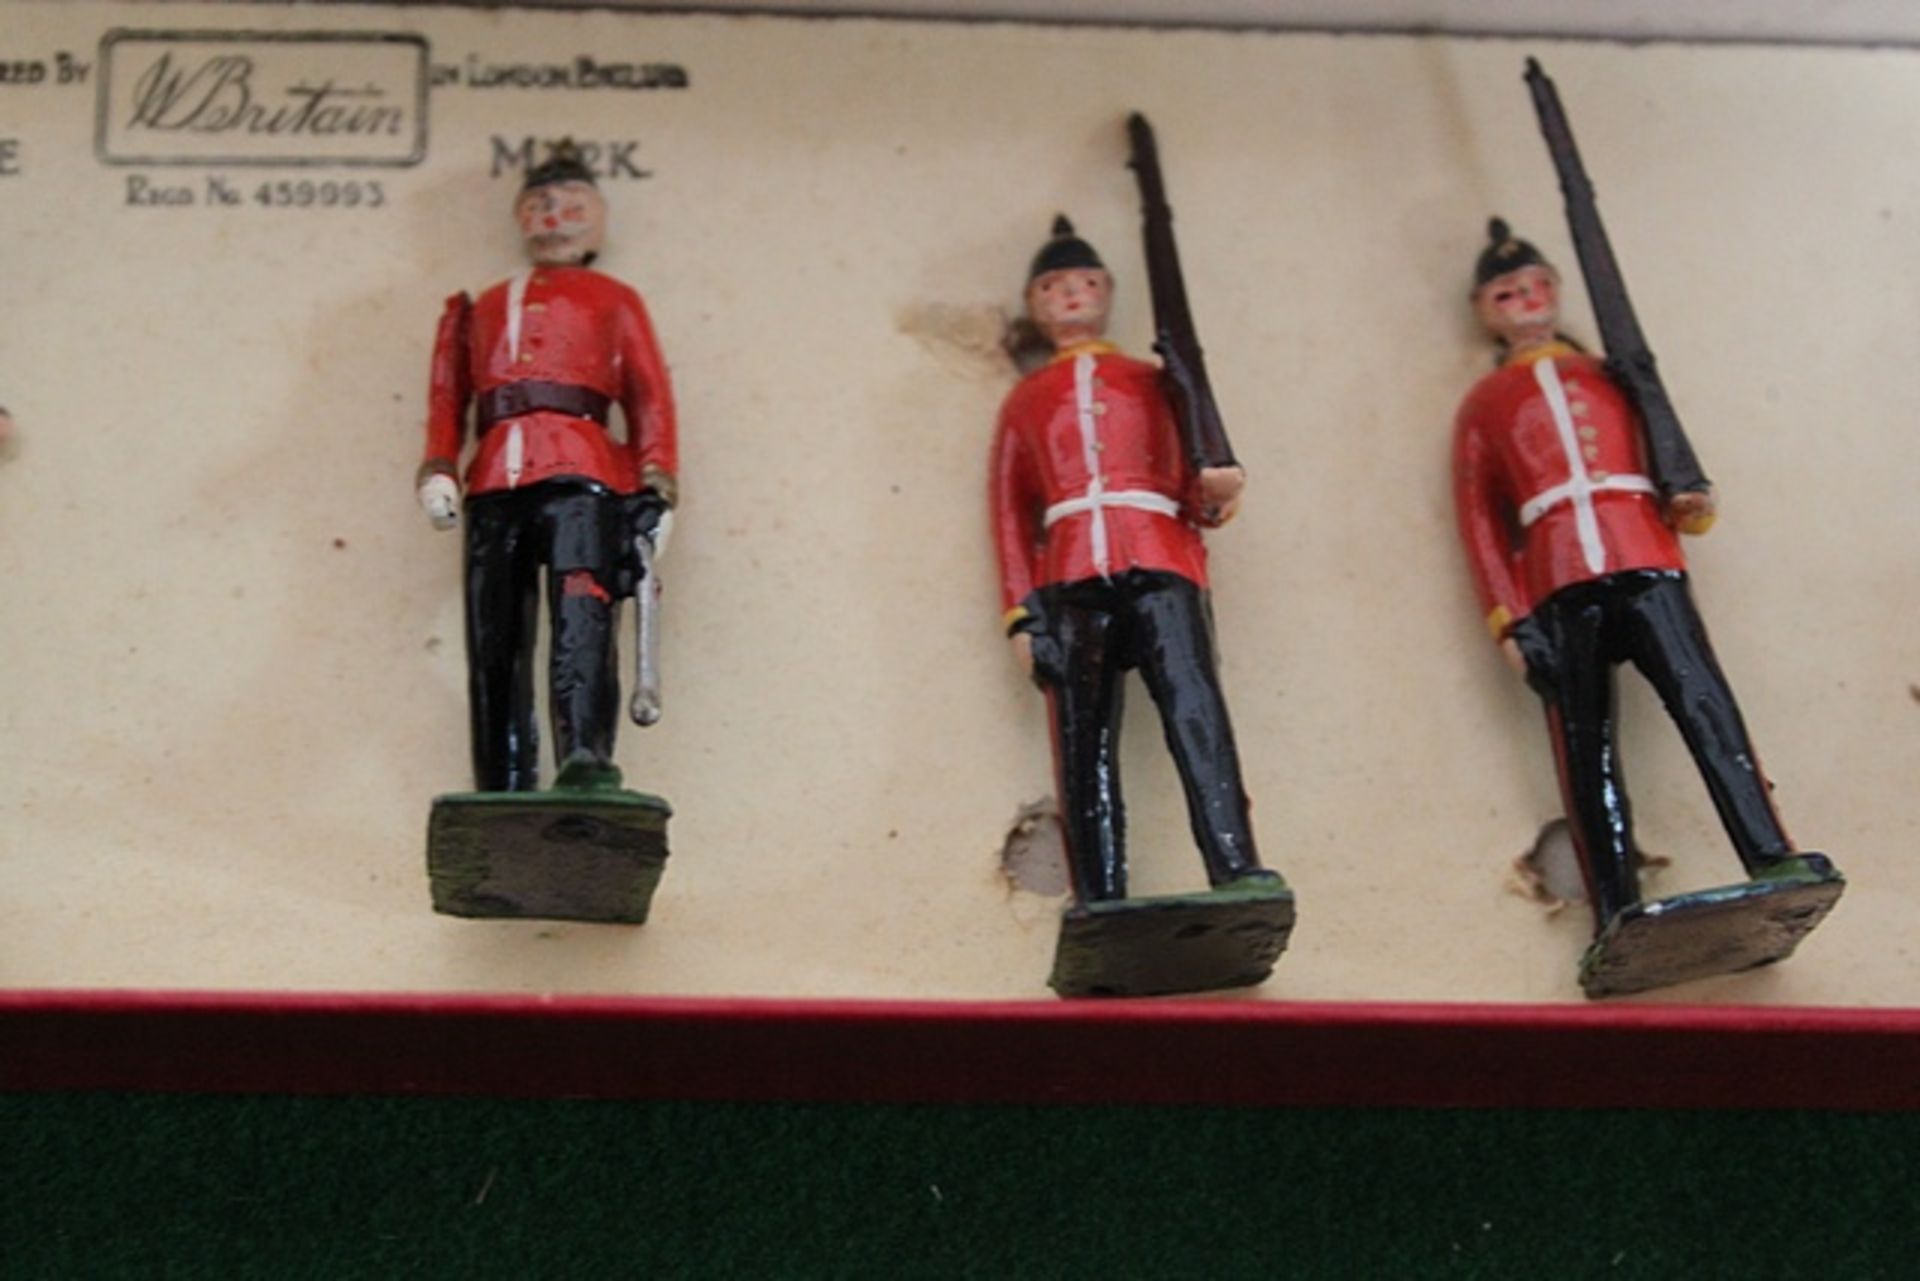 W Britain #76 Diecast Britains Soldiers Regiments Of All Nations Middlesex Regiment Complete With - Image 2 of 3